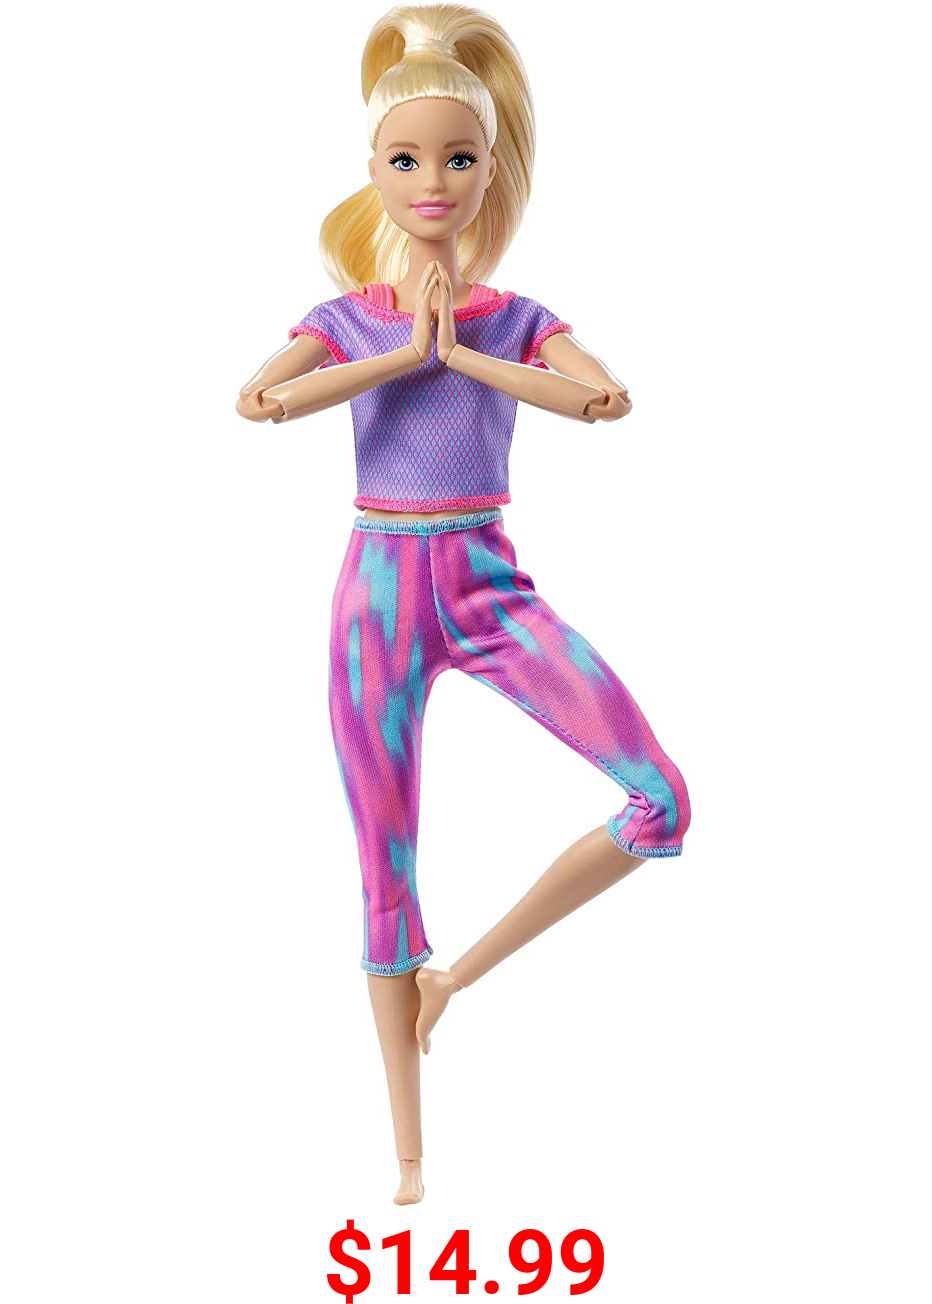 Barbie Made to Move Doll with 22 Flexible Joints & Long Blonde Ponytail Wearing Athleisure-wear for Kids 3 to 7 Years Old